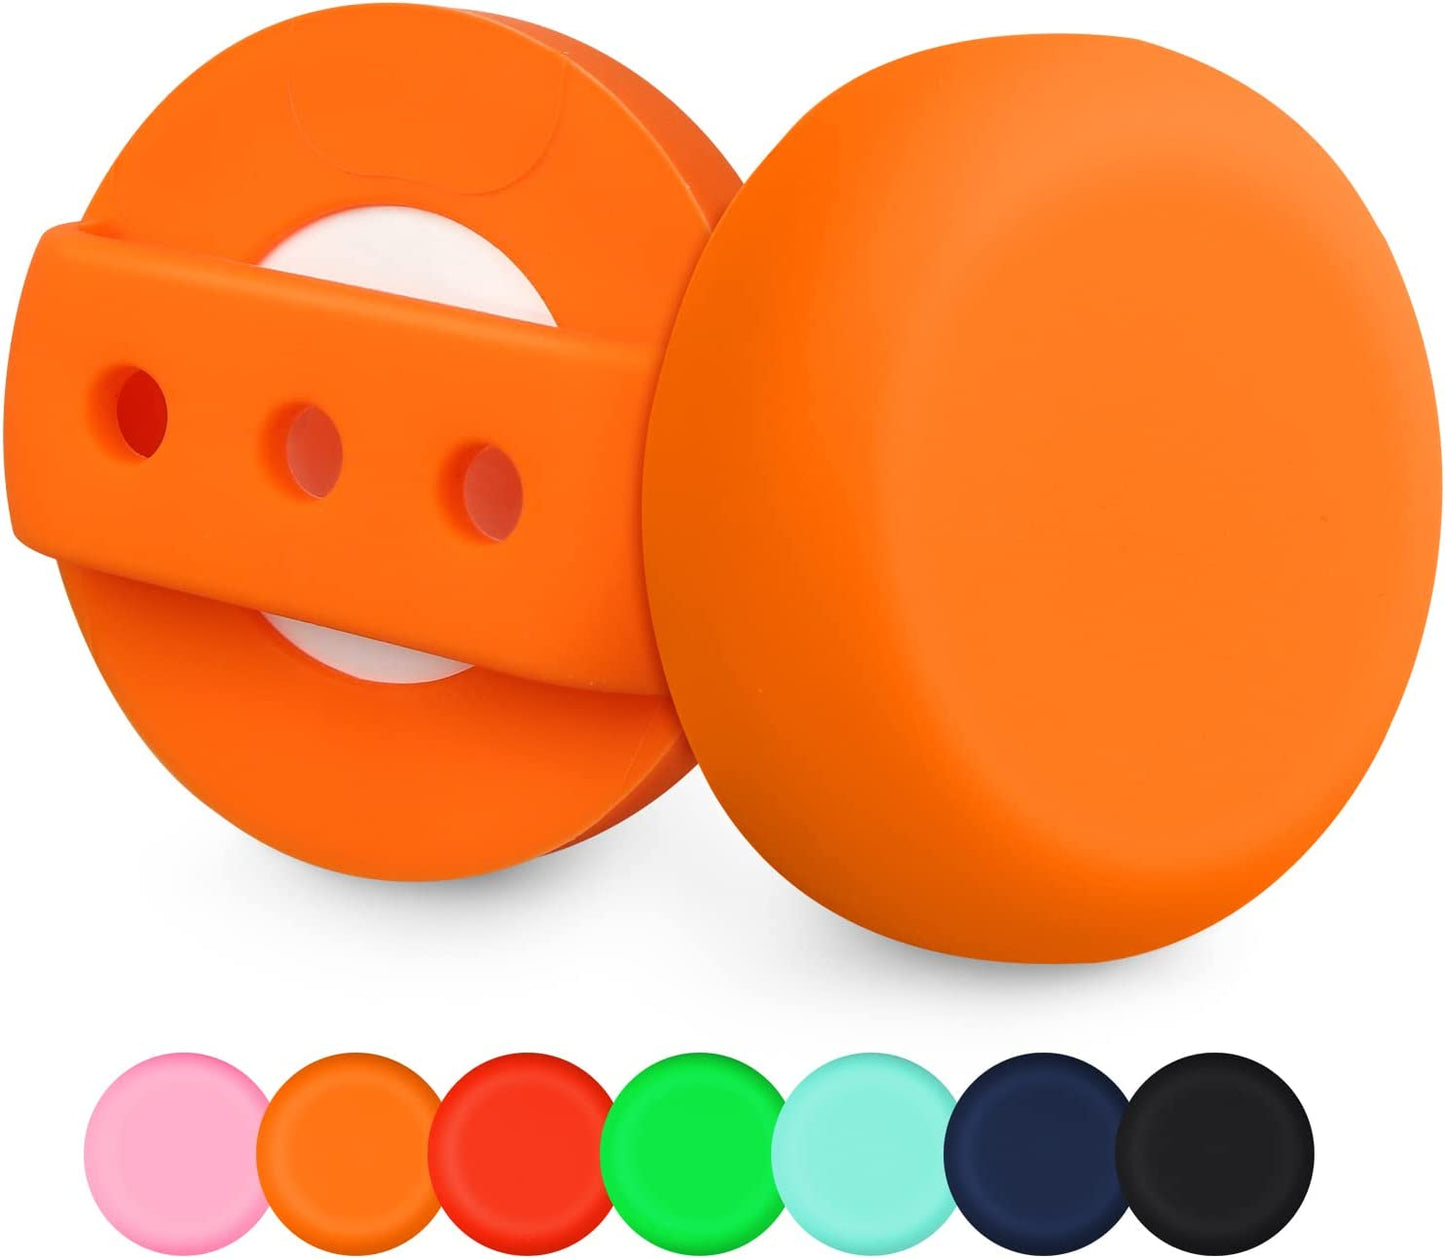 MOOGROU Airtag Dog Collar Holder 2 Pack,Newest Premium Protective Case for Apple Air Tag Tracker,Lightweight Silicone Airtag Case for Cat Collar Pet Loops,Waterproof Airtag.Dog Collar Holder Pink S Electronics > GPS Accessories > GPS Cases MOOGROU Orange+Orange L-3/4" 1" 